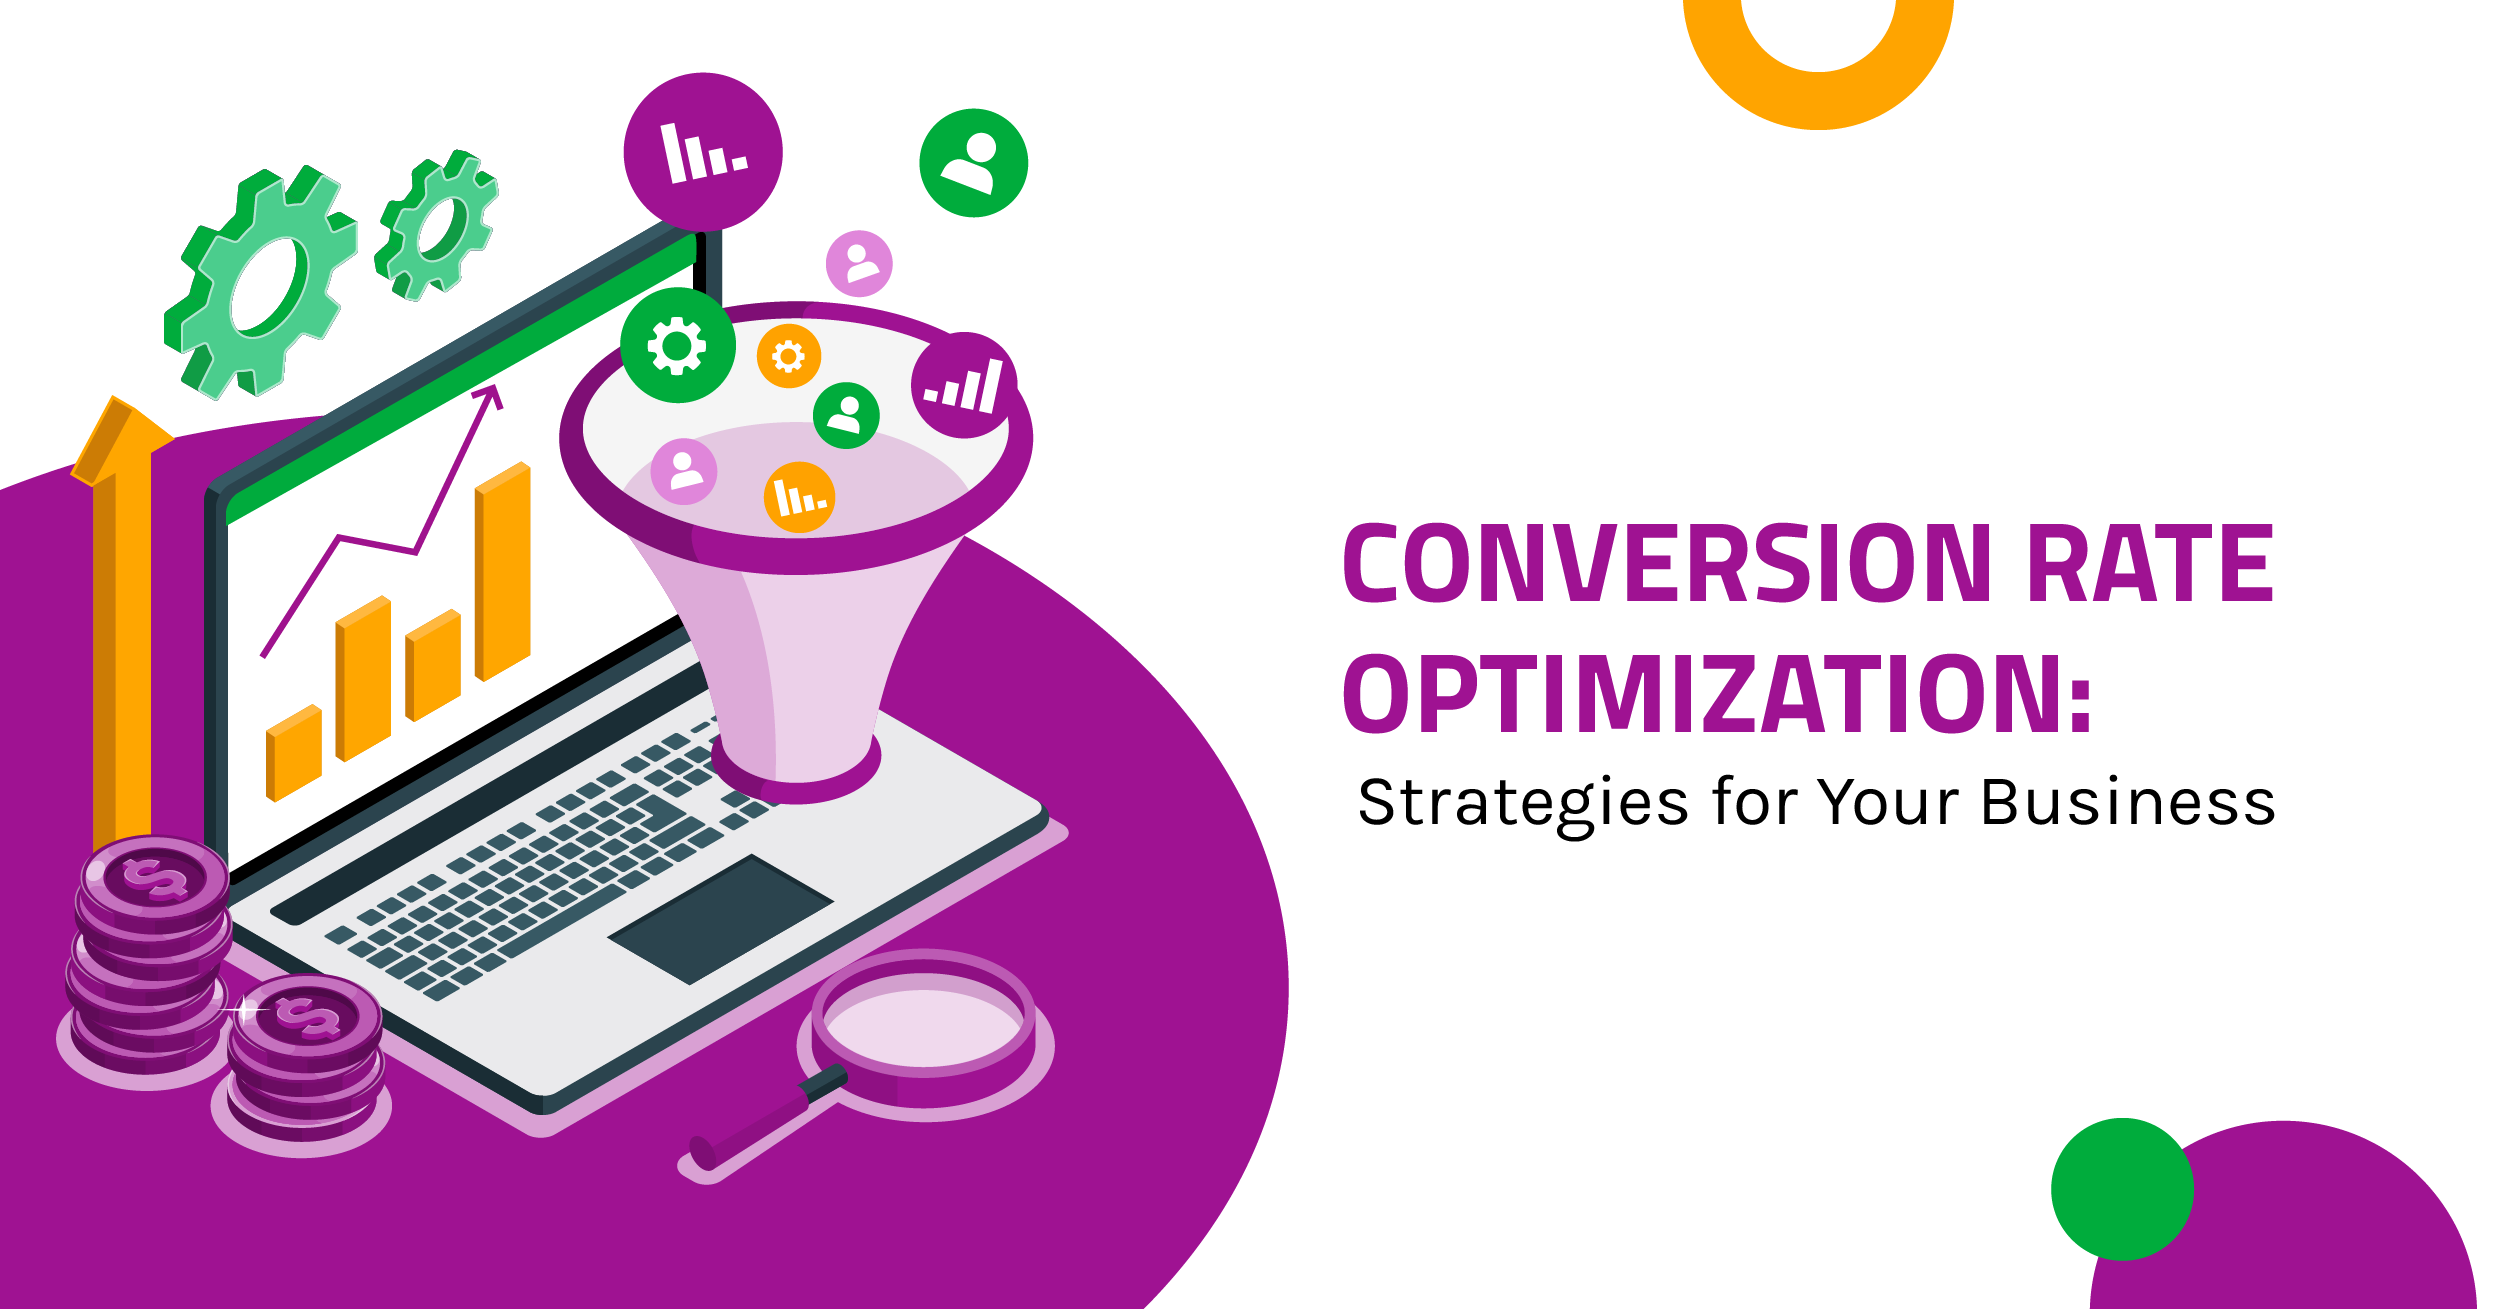 Conversion Rate Optimization - Strategies for Your Business